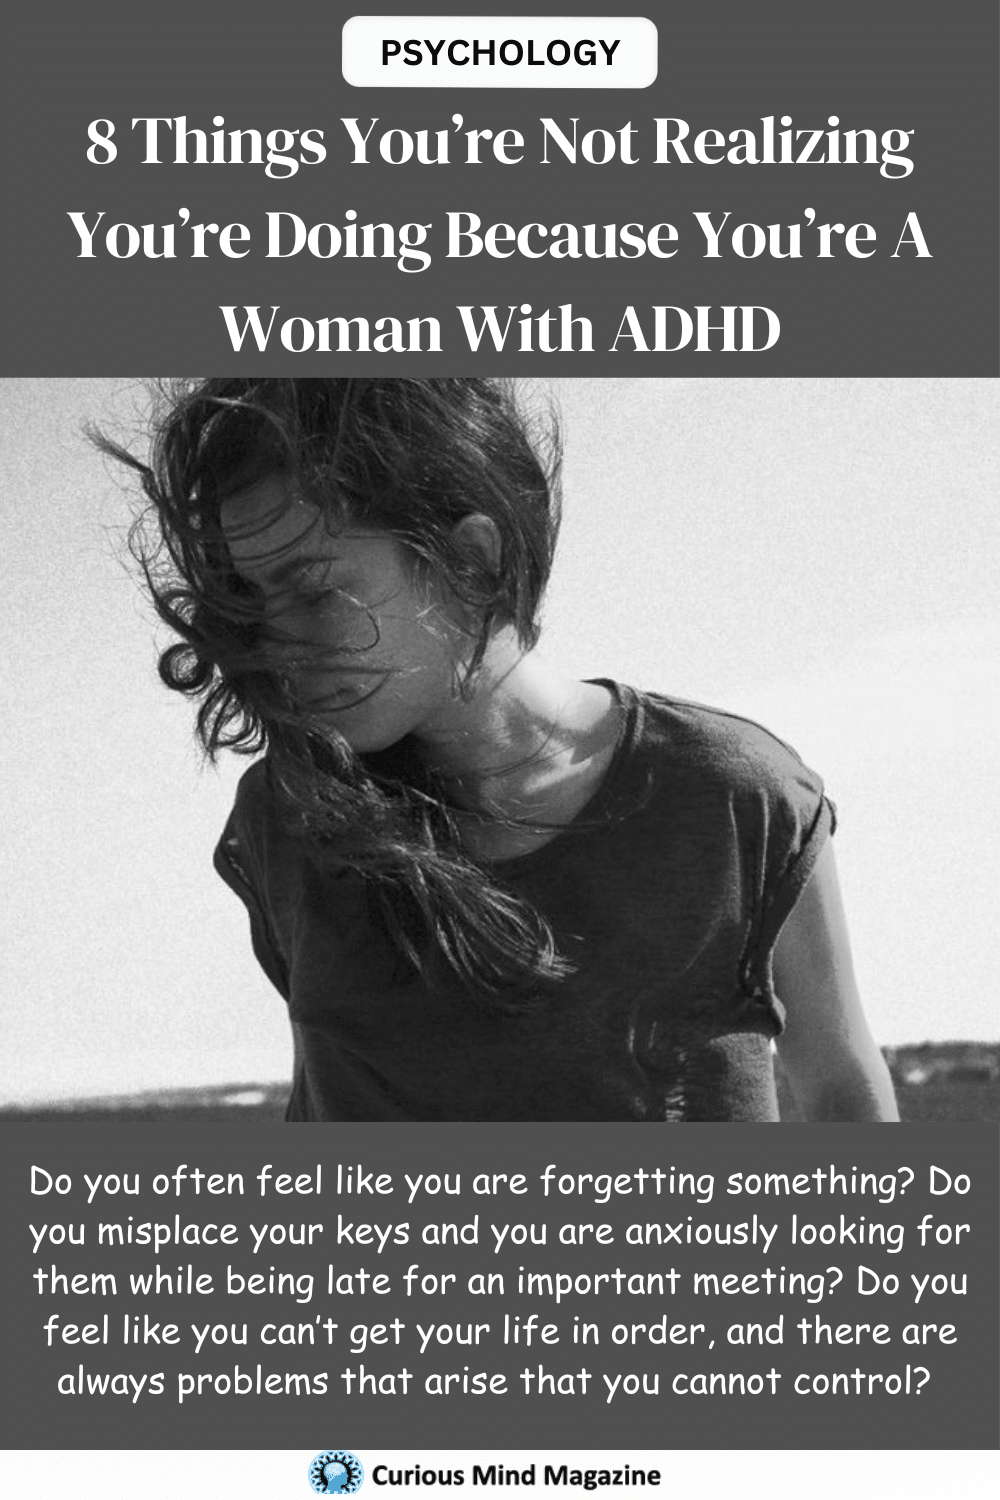 8 Things You’re Not Realizing You’re Doing Because You’re A Woman With ADHD